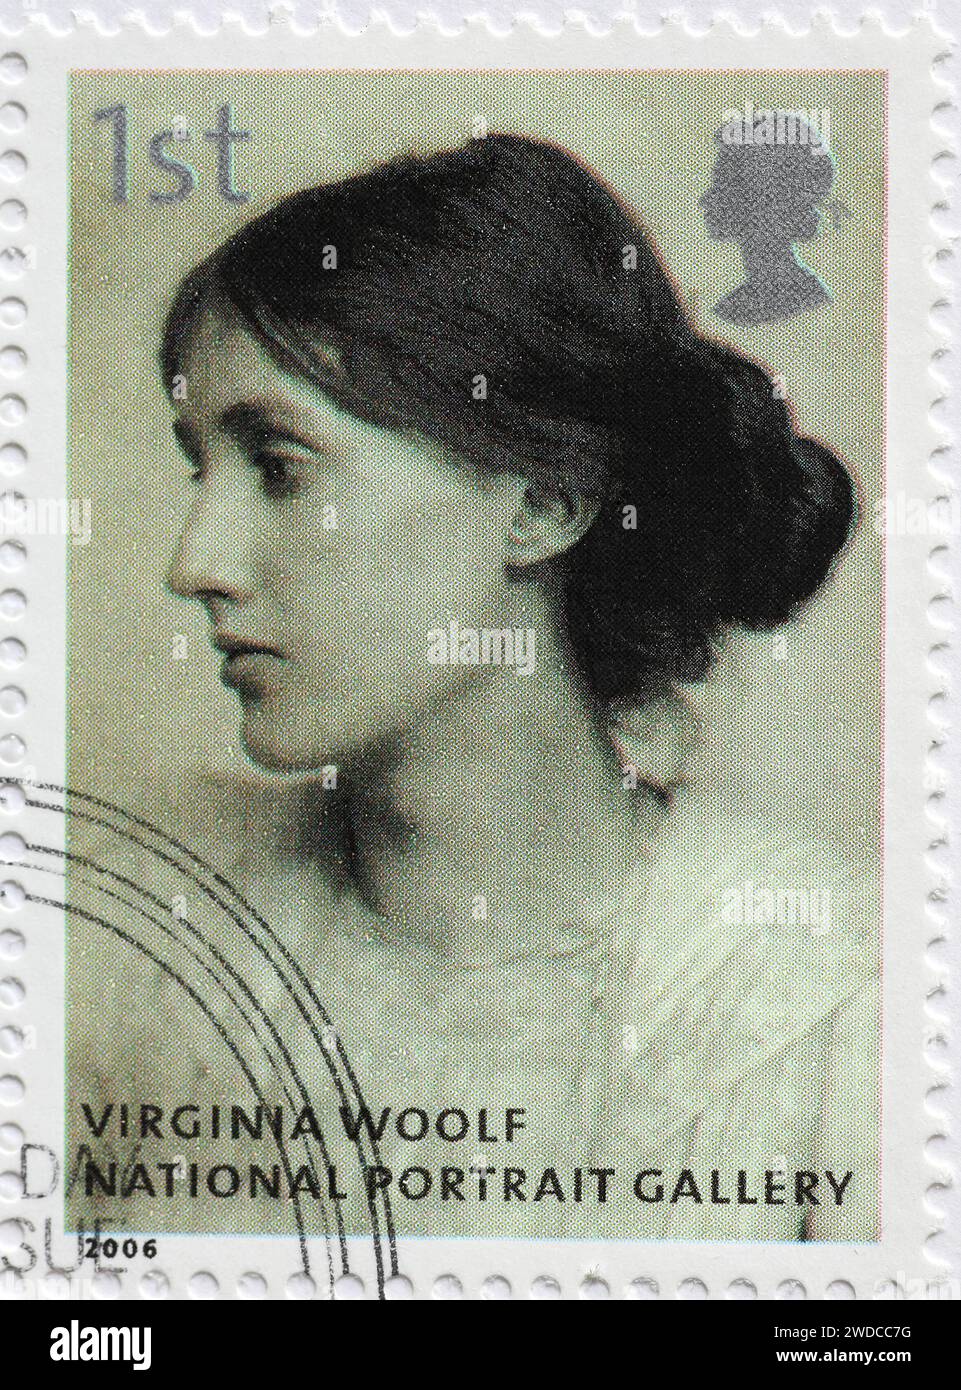 Virginia Woolf from the National Portrait Gallery on postage stamp Stock Photo